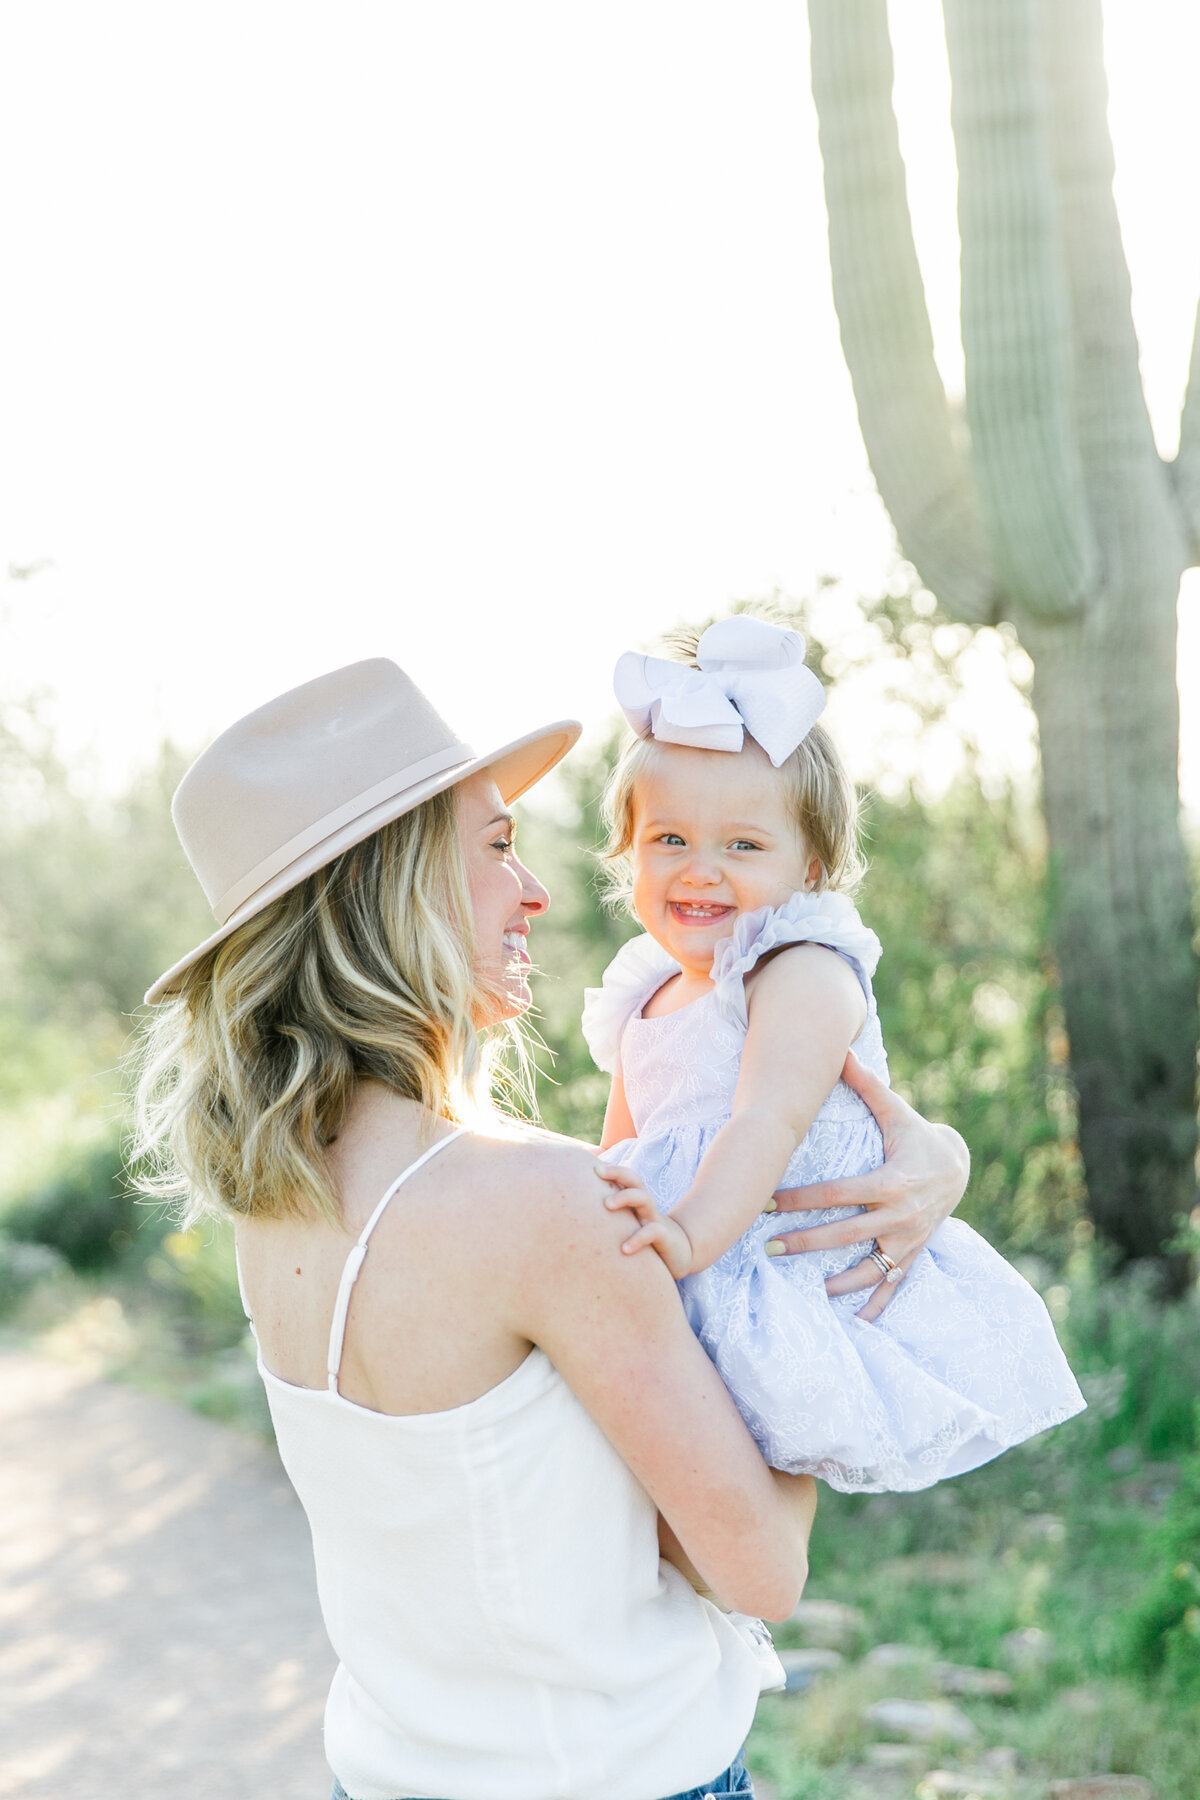 Karlie Colleen Photography - Scottsdale family photography - Dymin & family-127